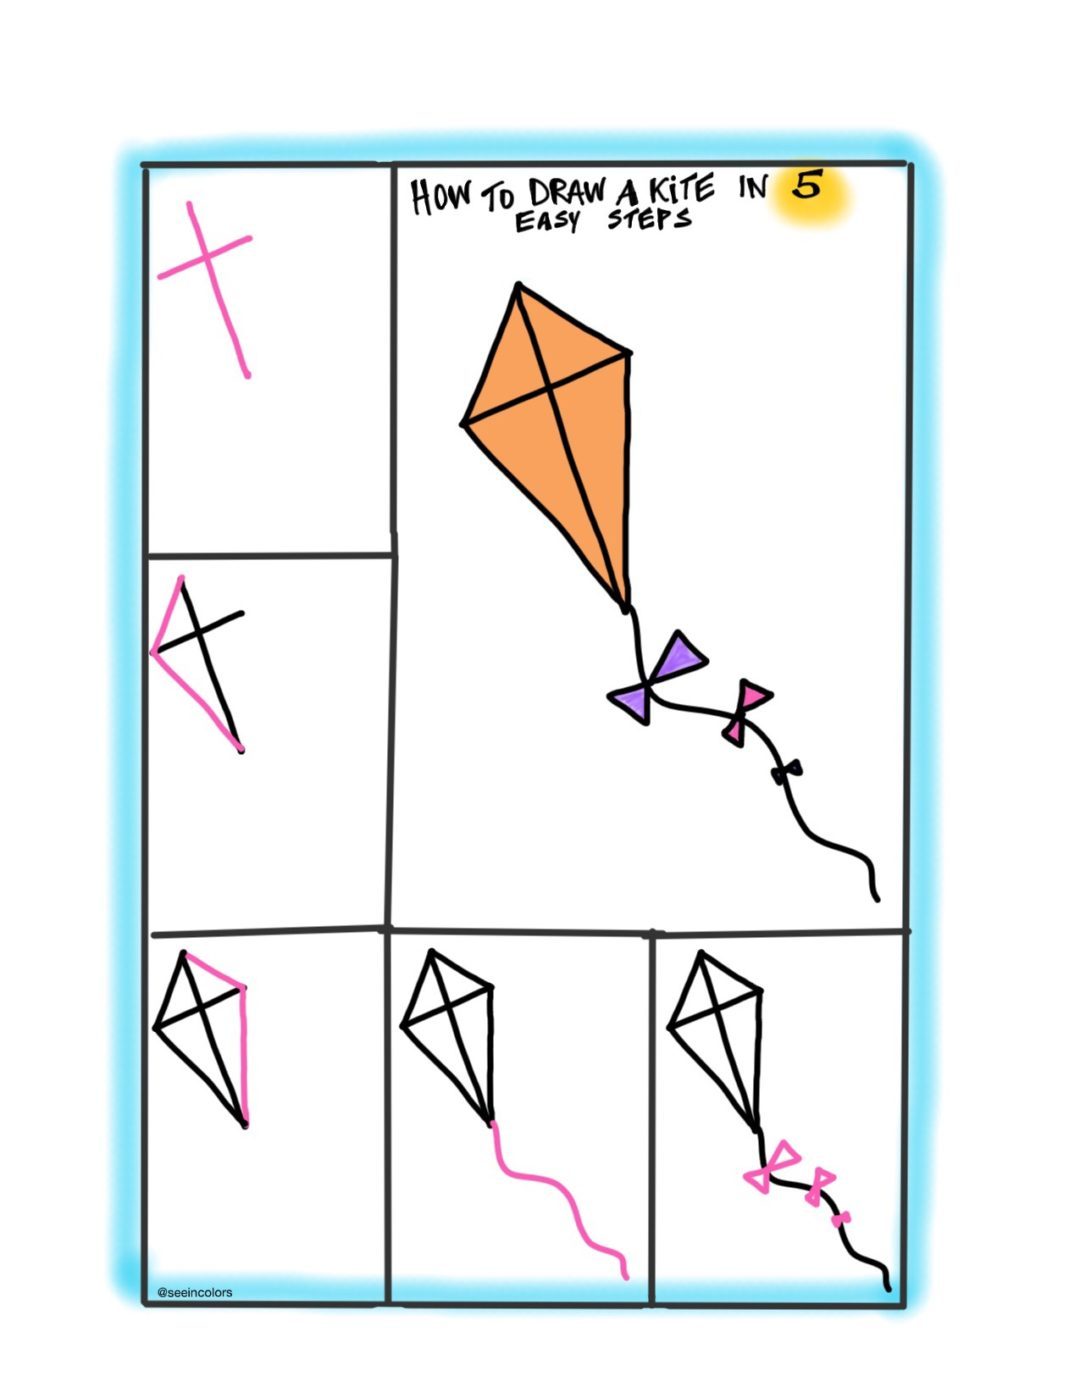 How to Draw a Kite in 5 Easy Steps Graphic Recording, Visual Notes